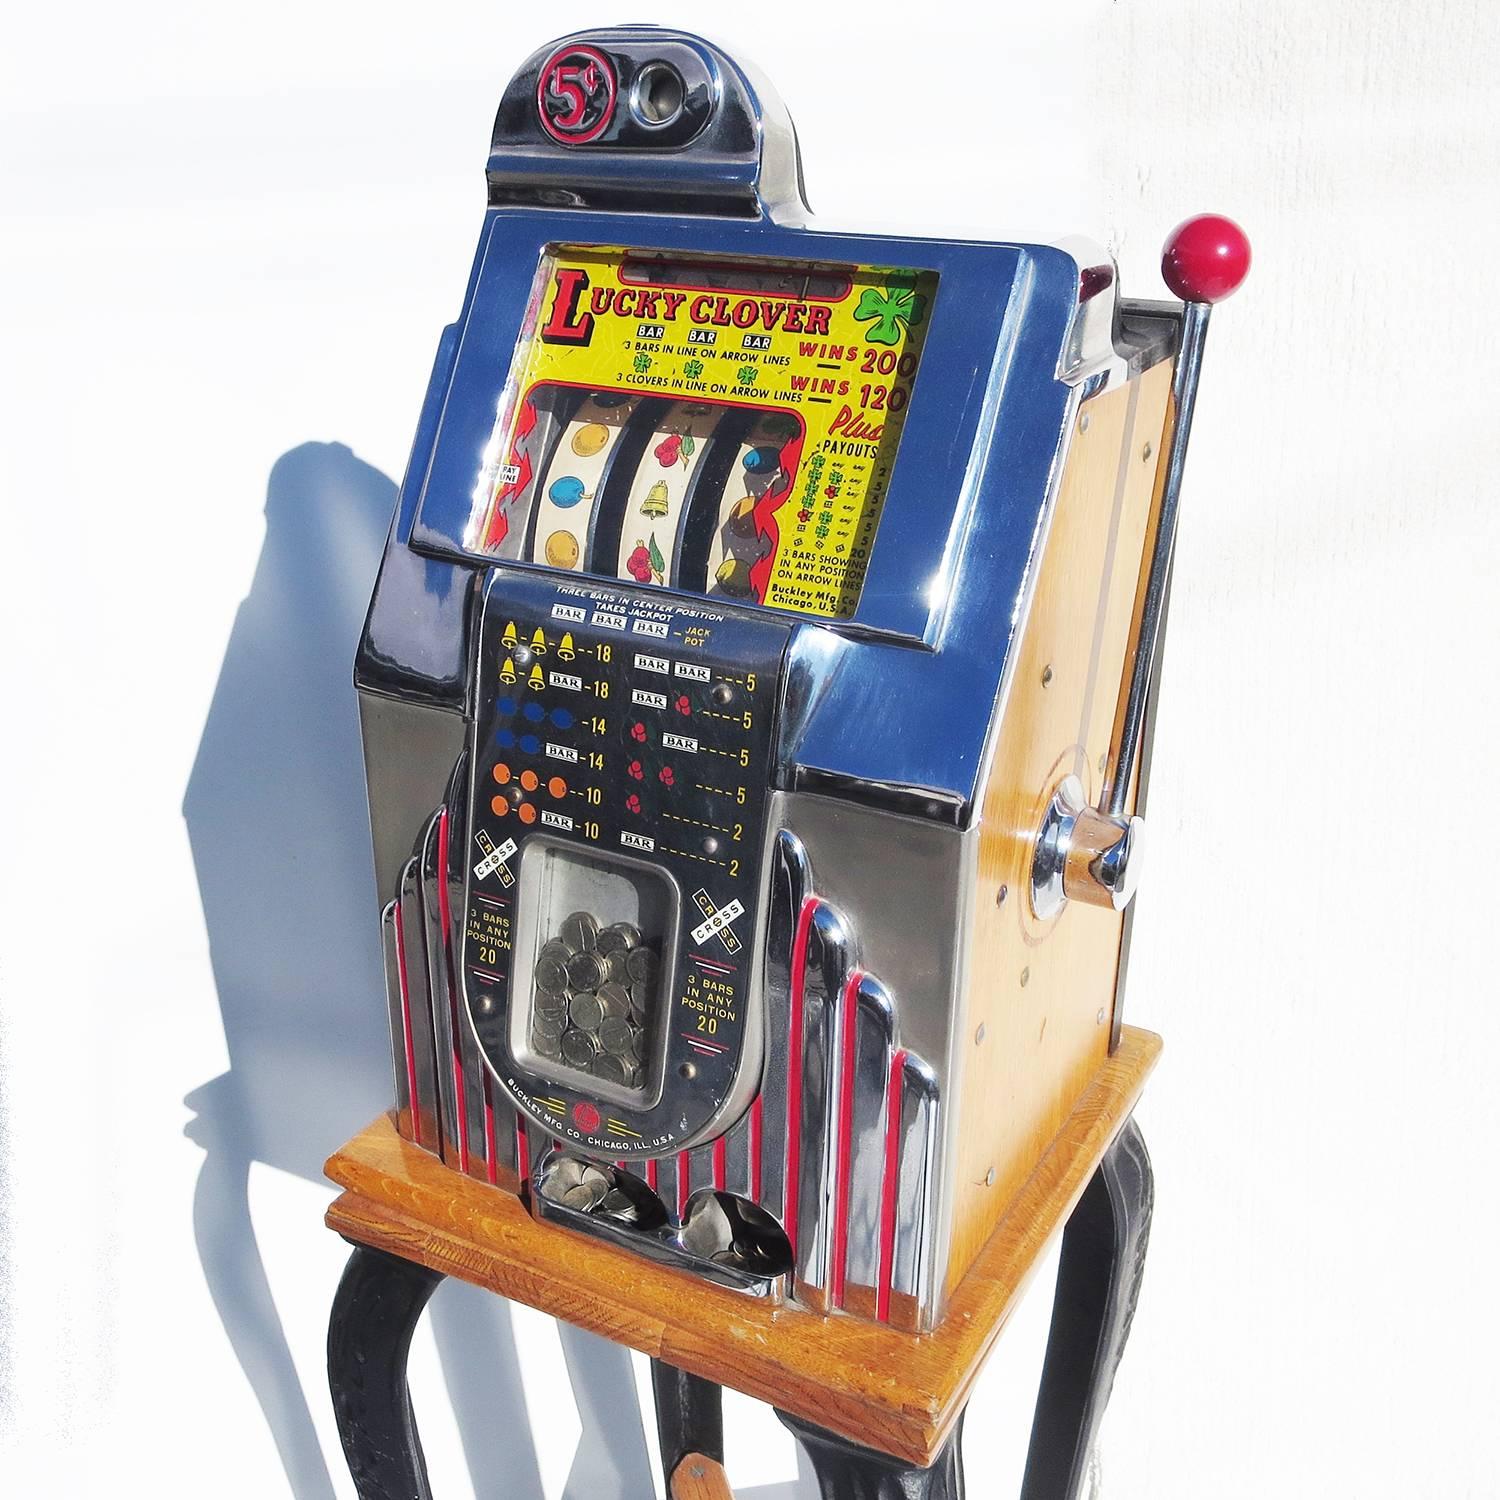 This great slot machine plays well, and looks great. The cabinet was restored some time ago, with the chrome and woods refinished. The machine has just been serviced and lubricated by a local professional. It pays out readily and is fun to play. The